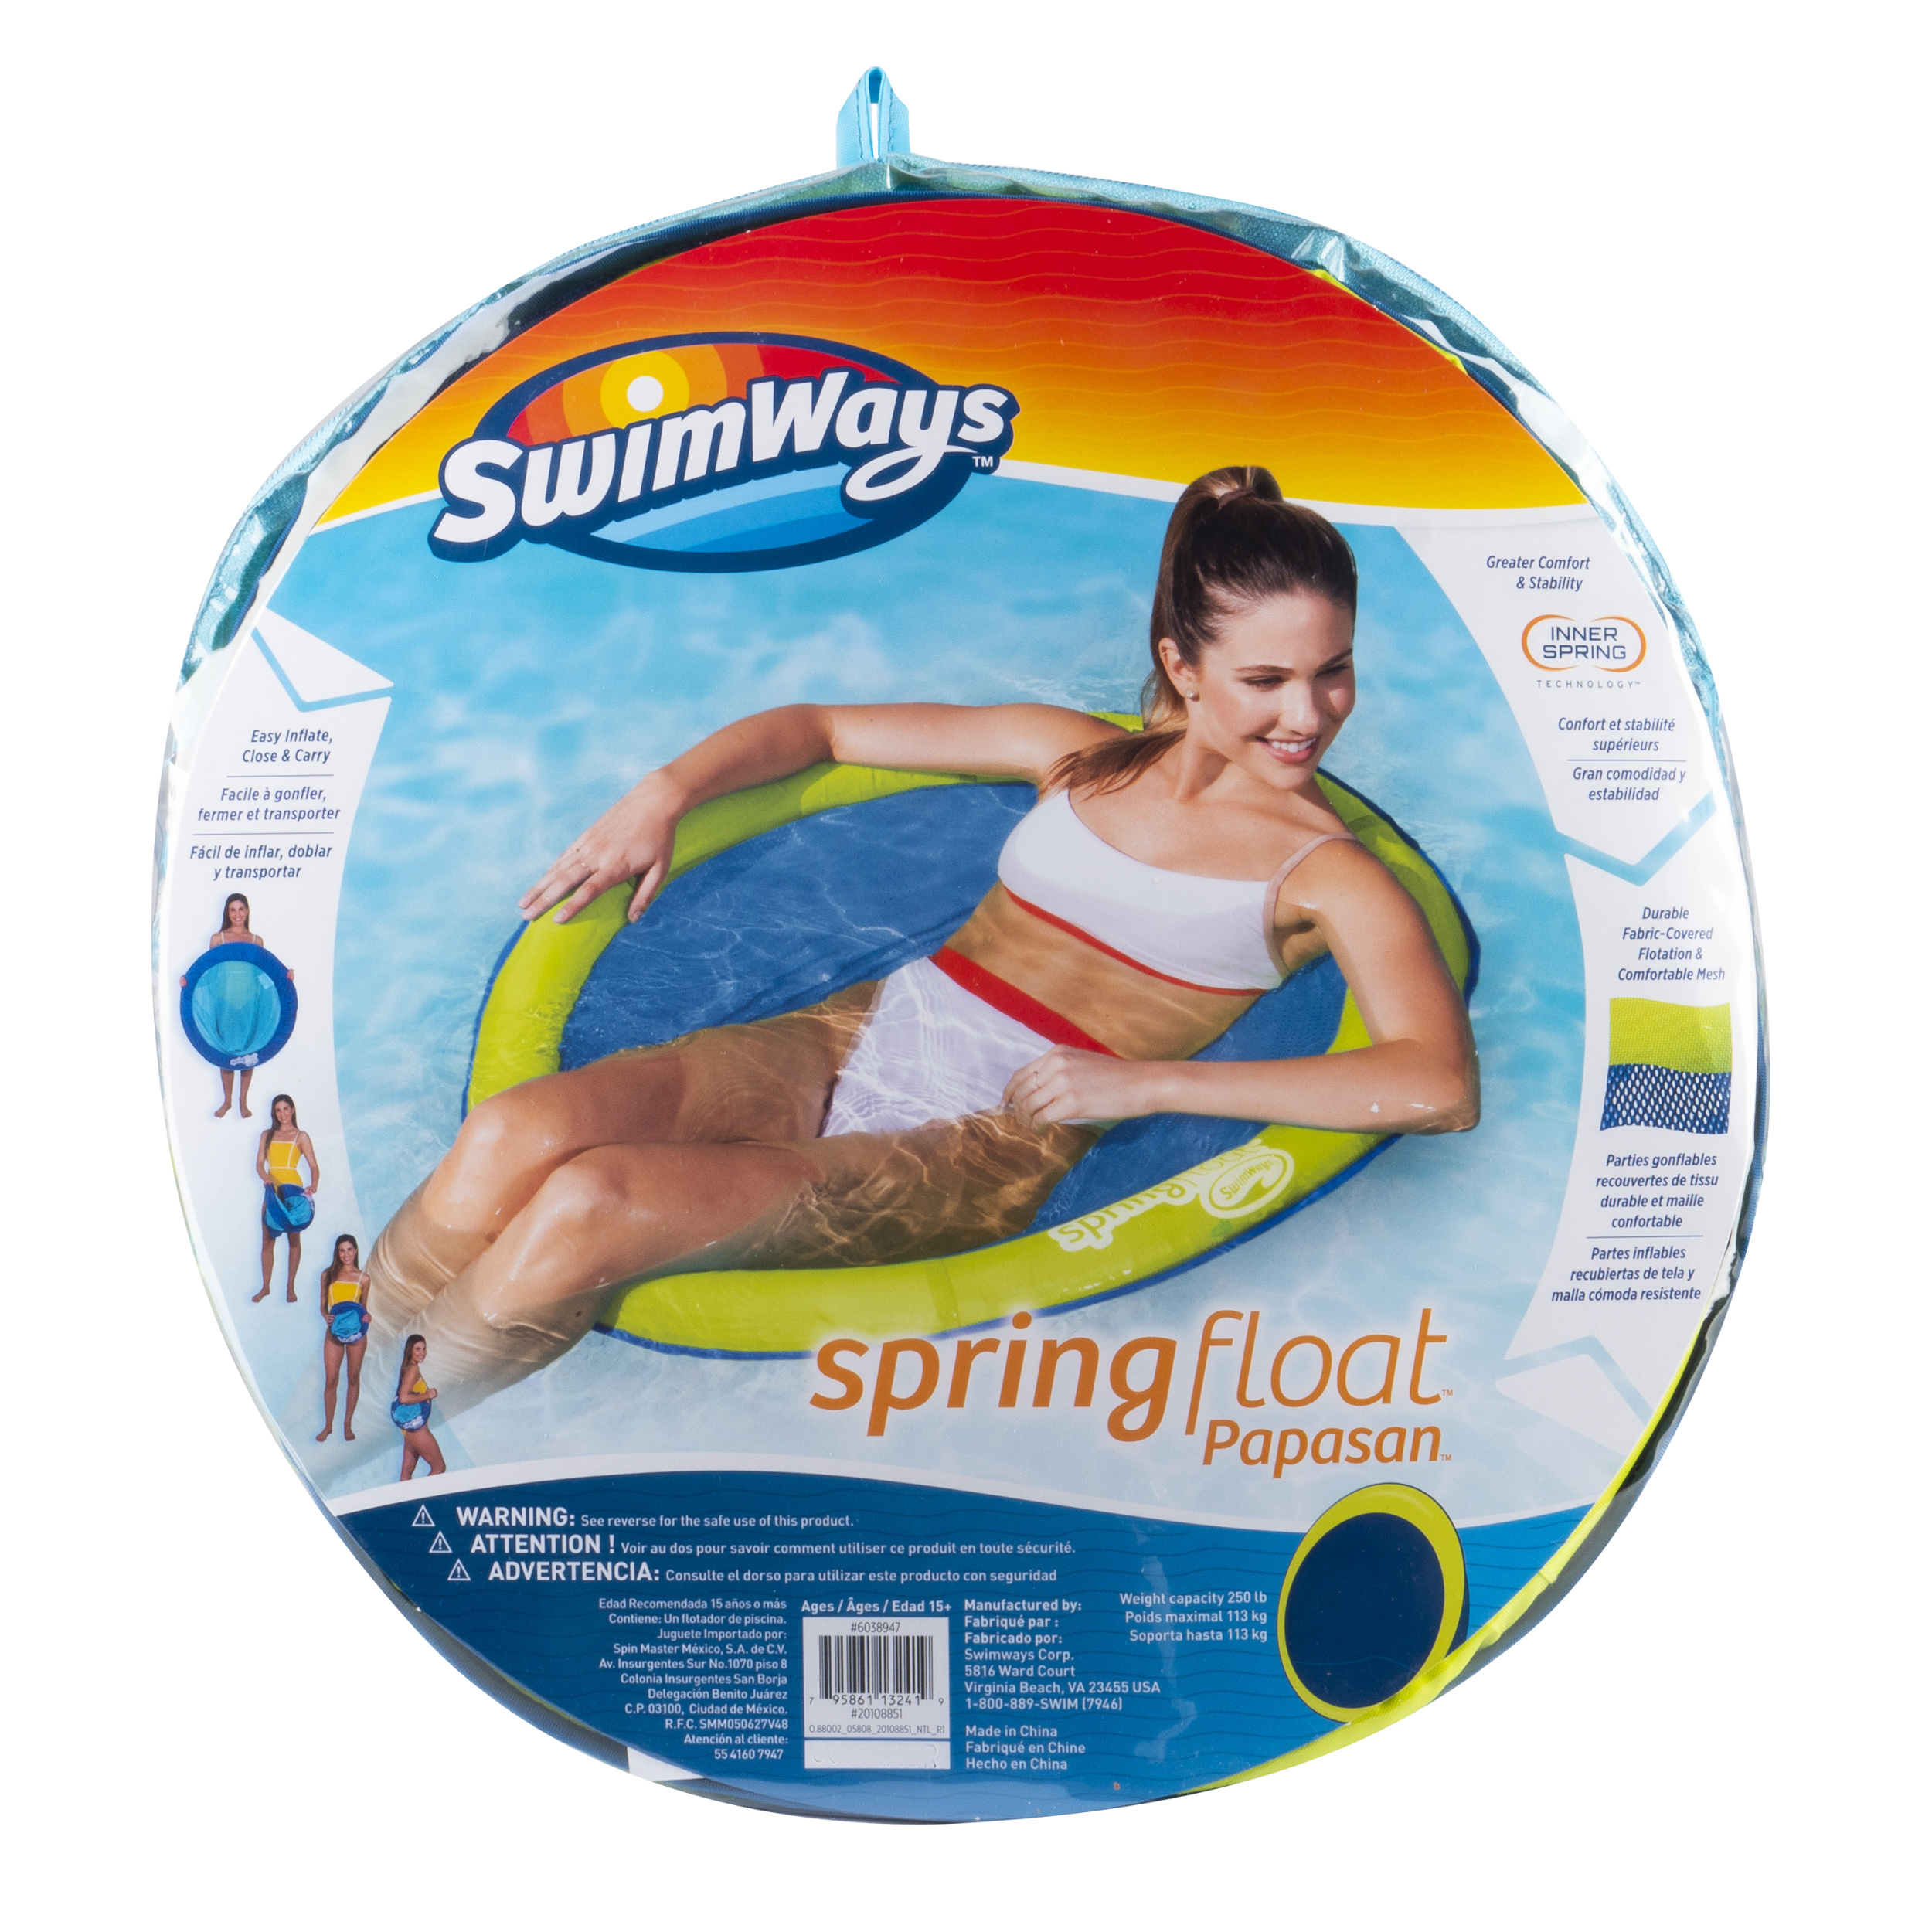 SwimWays Spring Float Papasan - Mesh Float for Pool or Lake (Style May Vary) - image 1 of 5